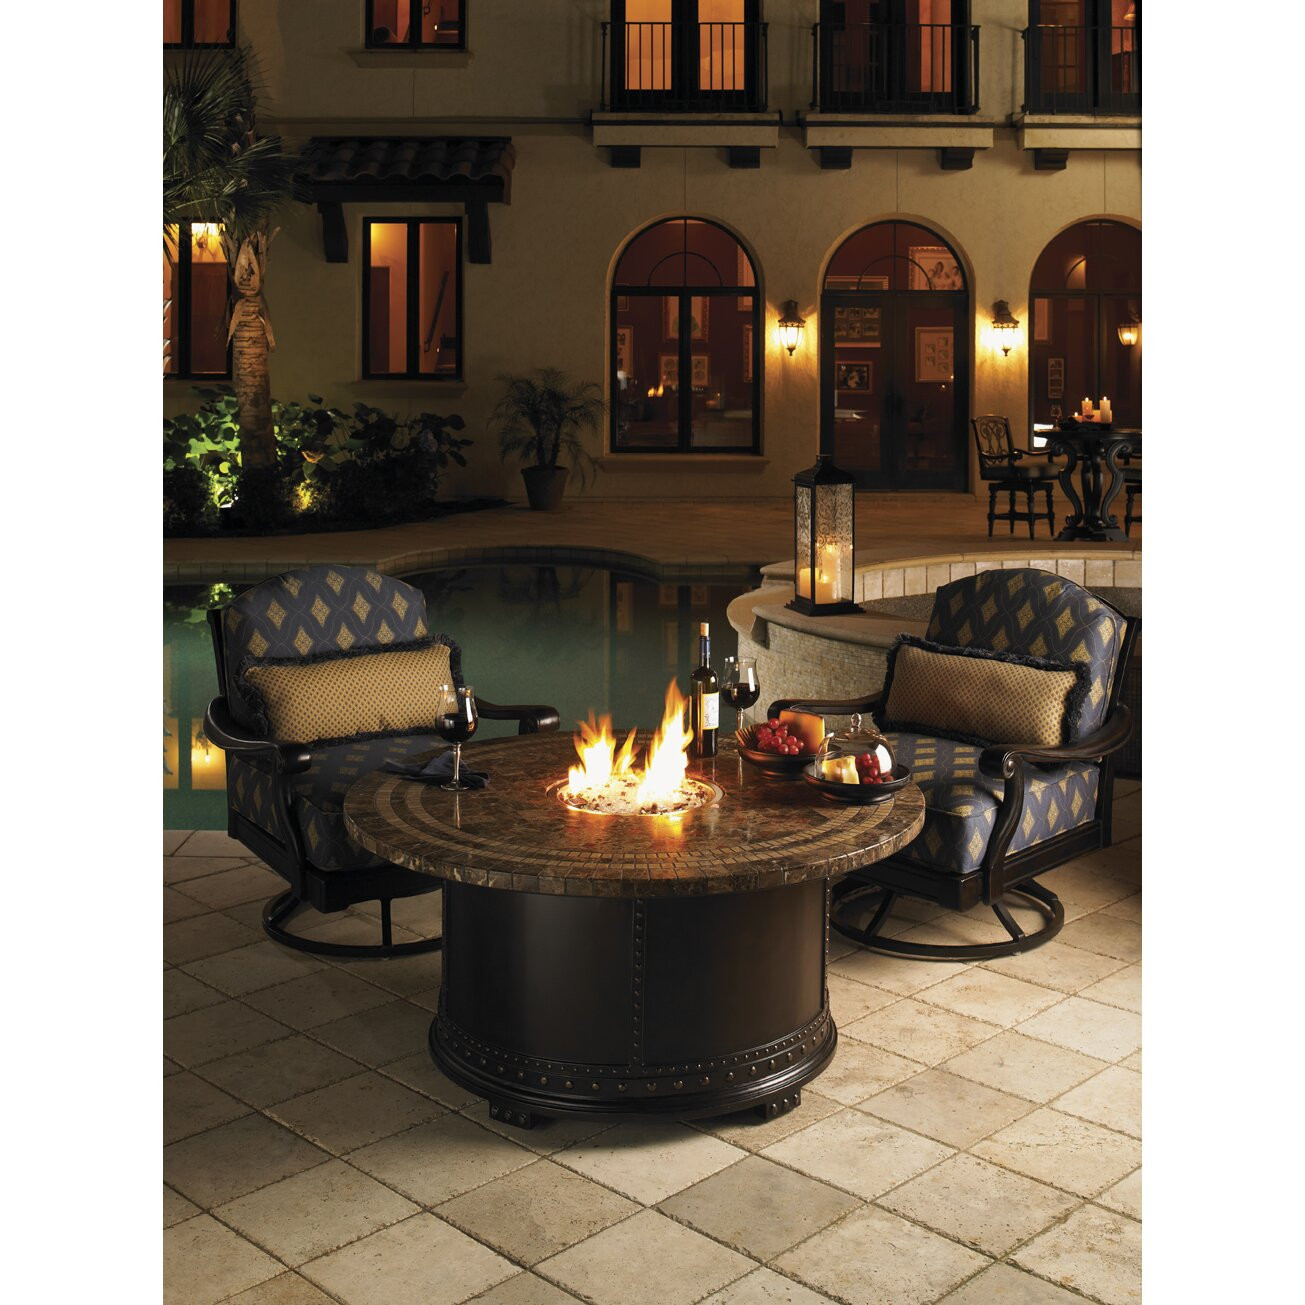 Outdoor Gas Fire Pits
 Kingstown Sedona Gas Fire Pit